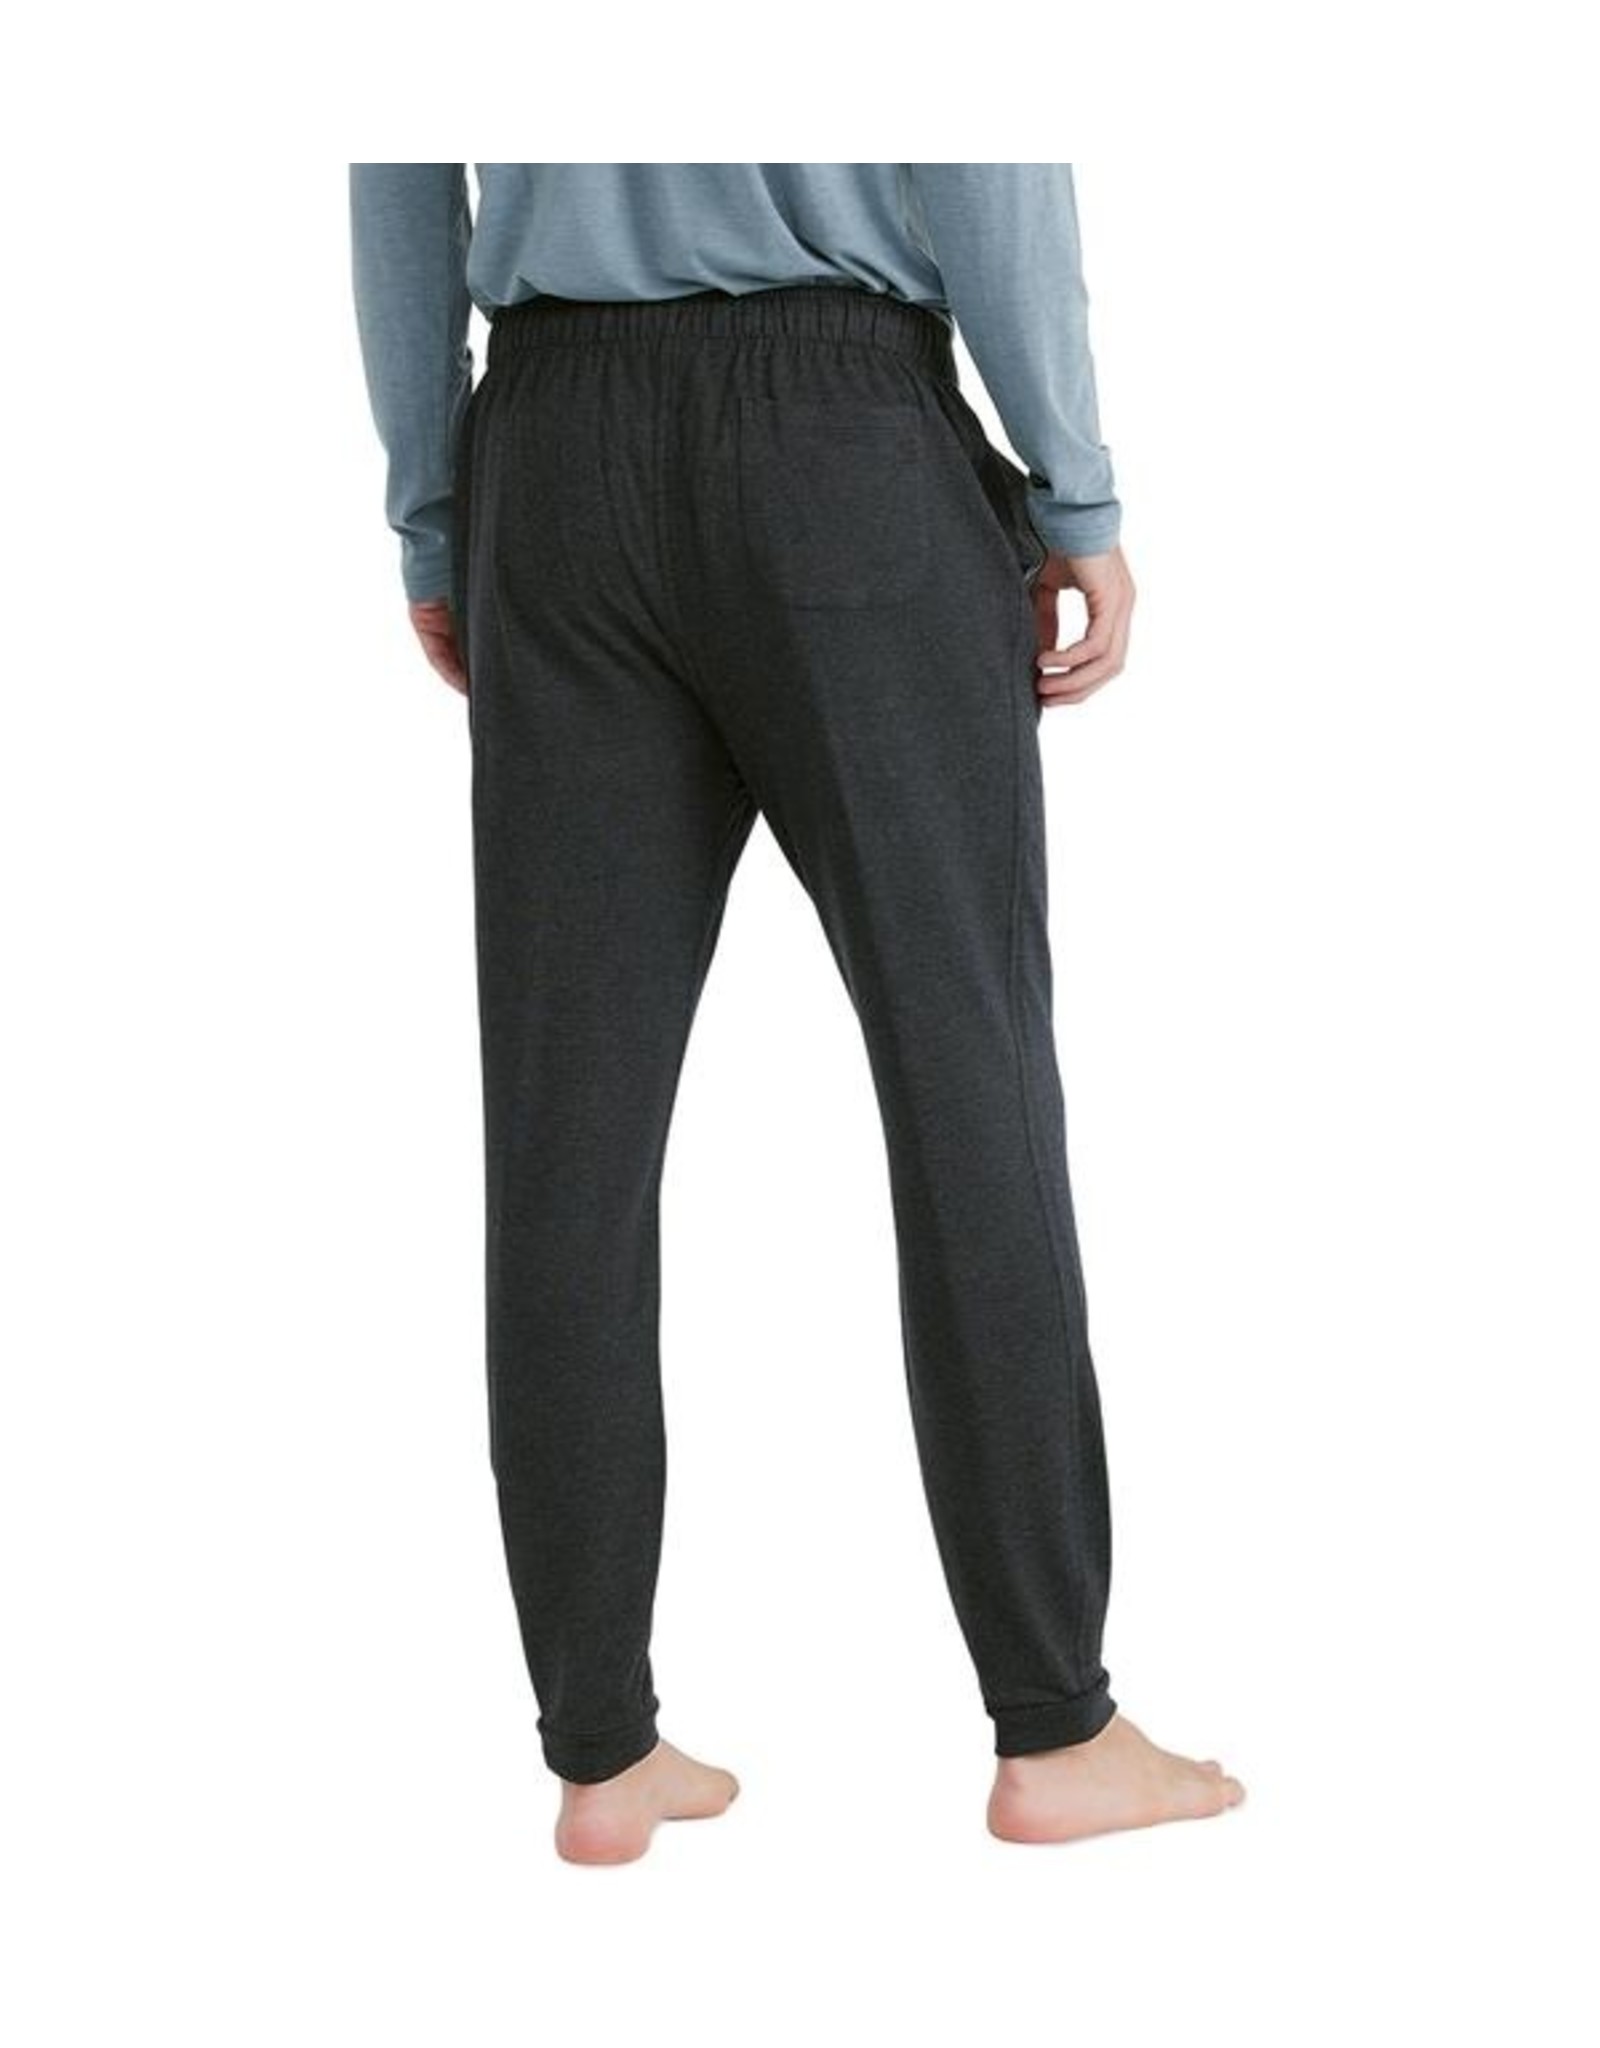 Free Fly Free Fly M's Bamboo Heritage Fleece Joggers